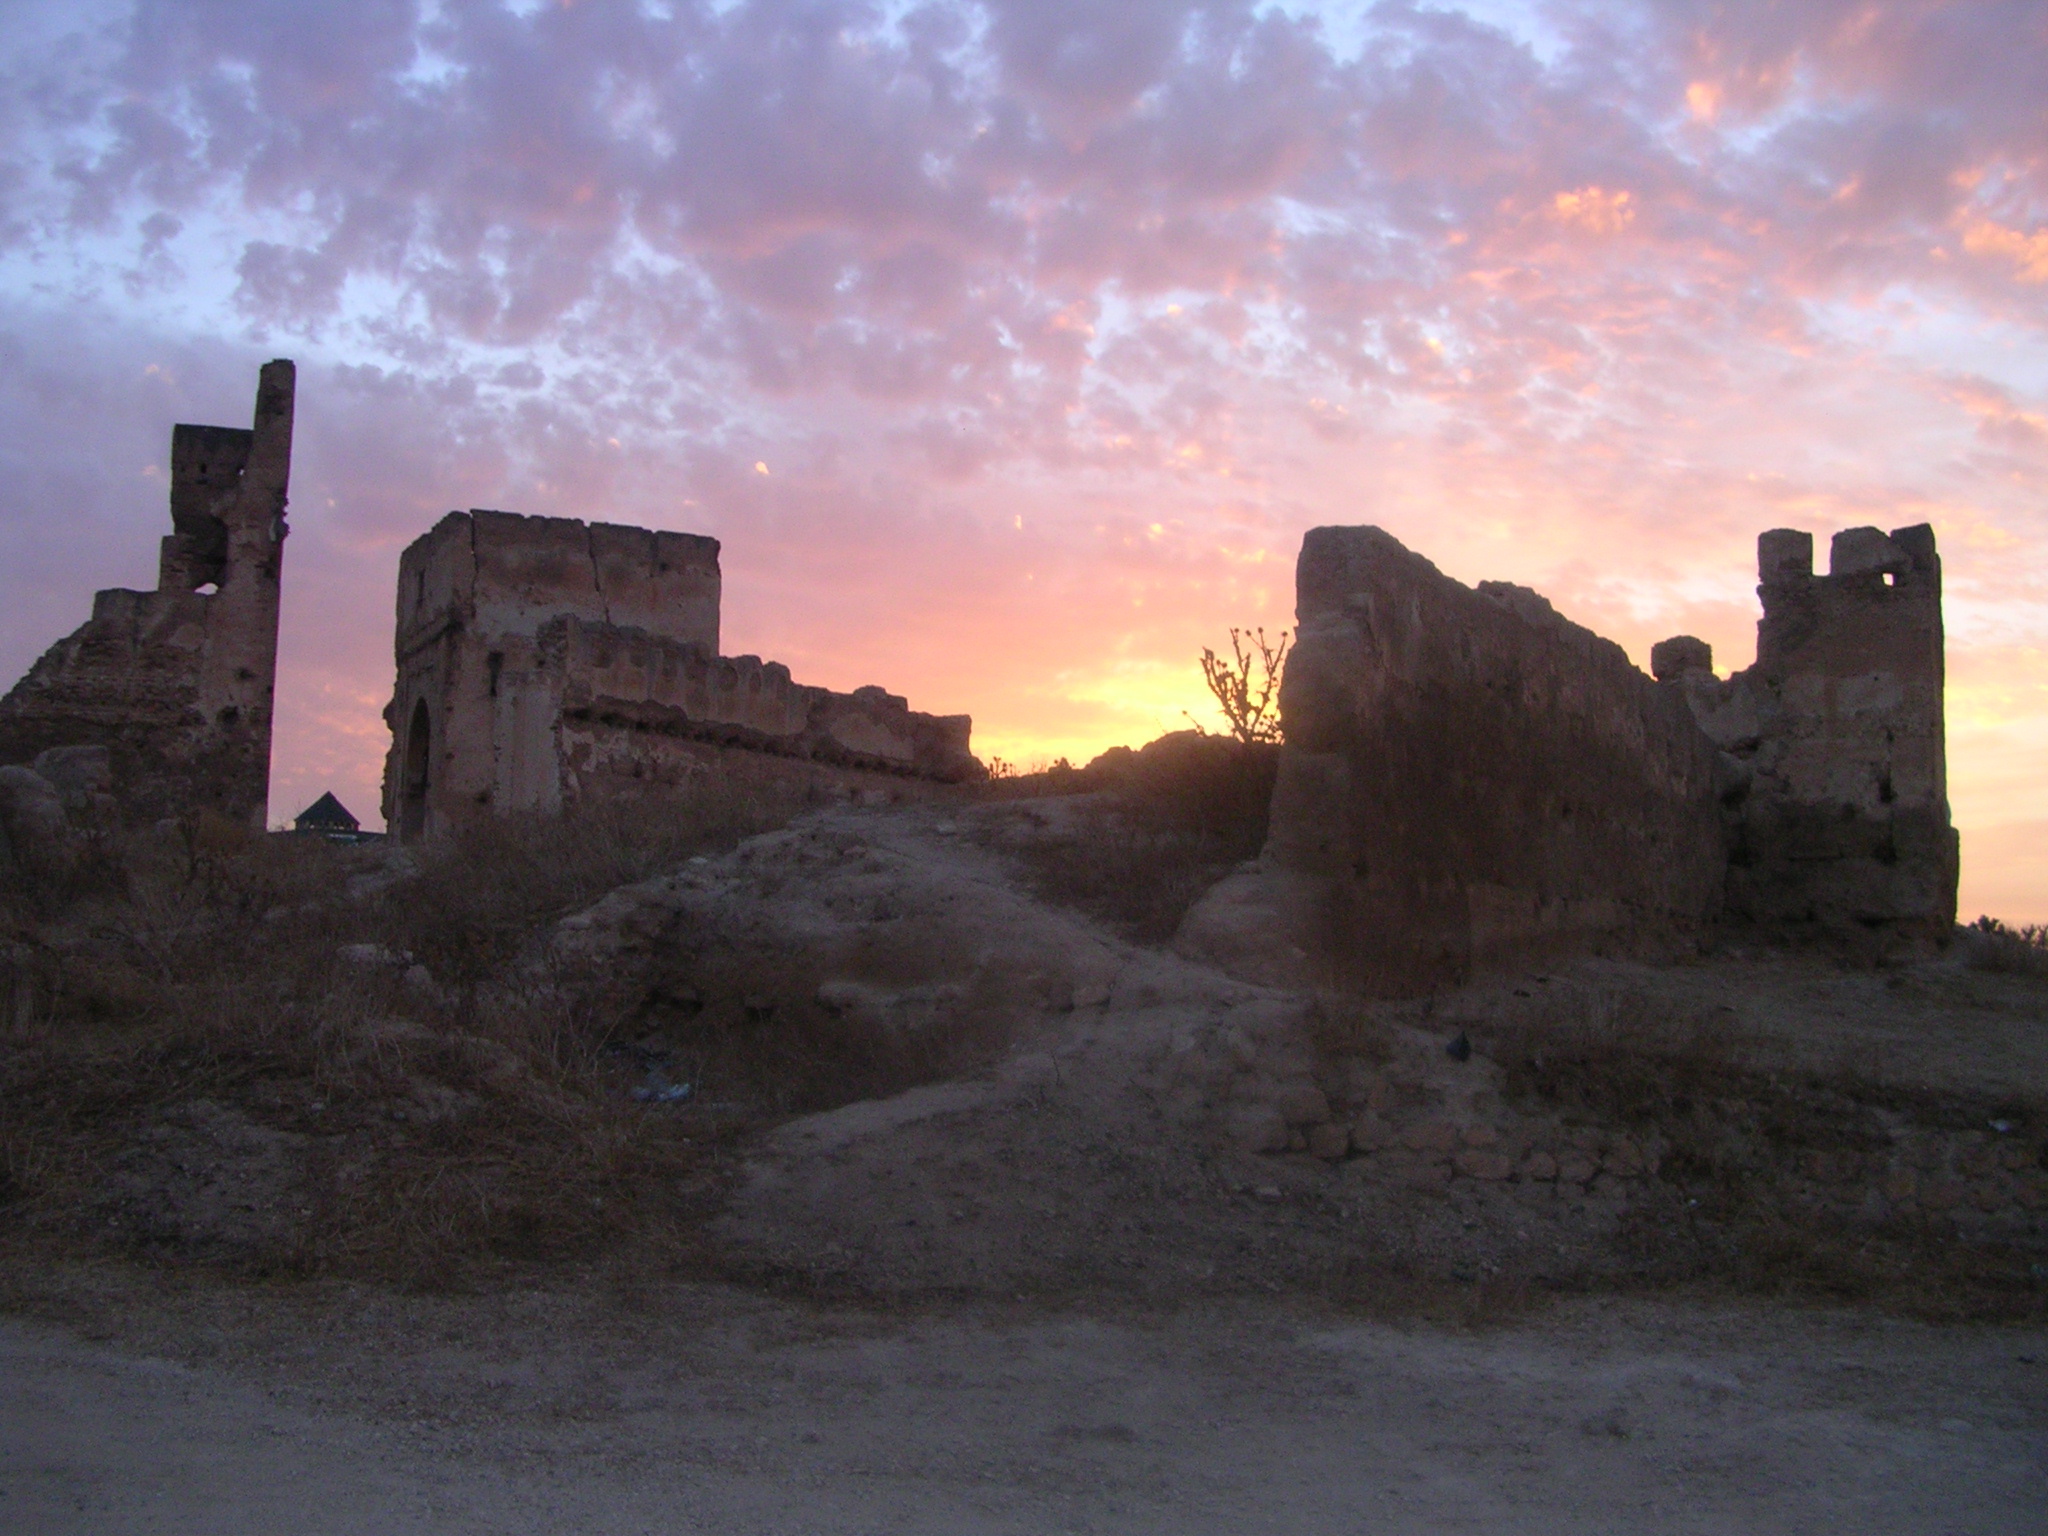 sunset at Merenid tombs in Fez